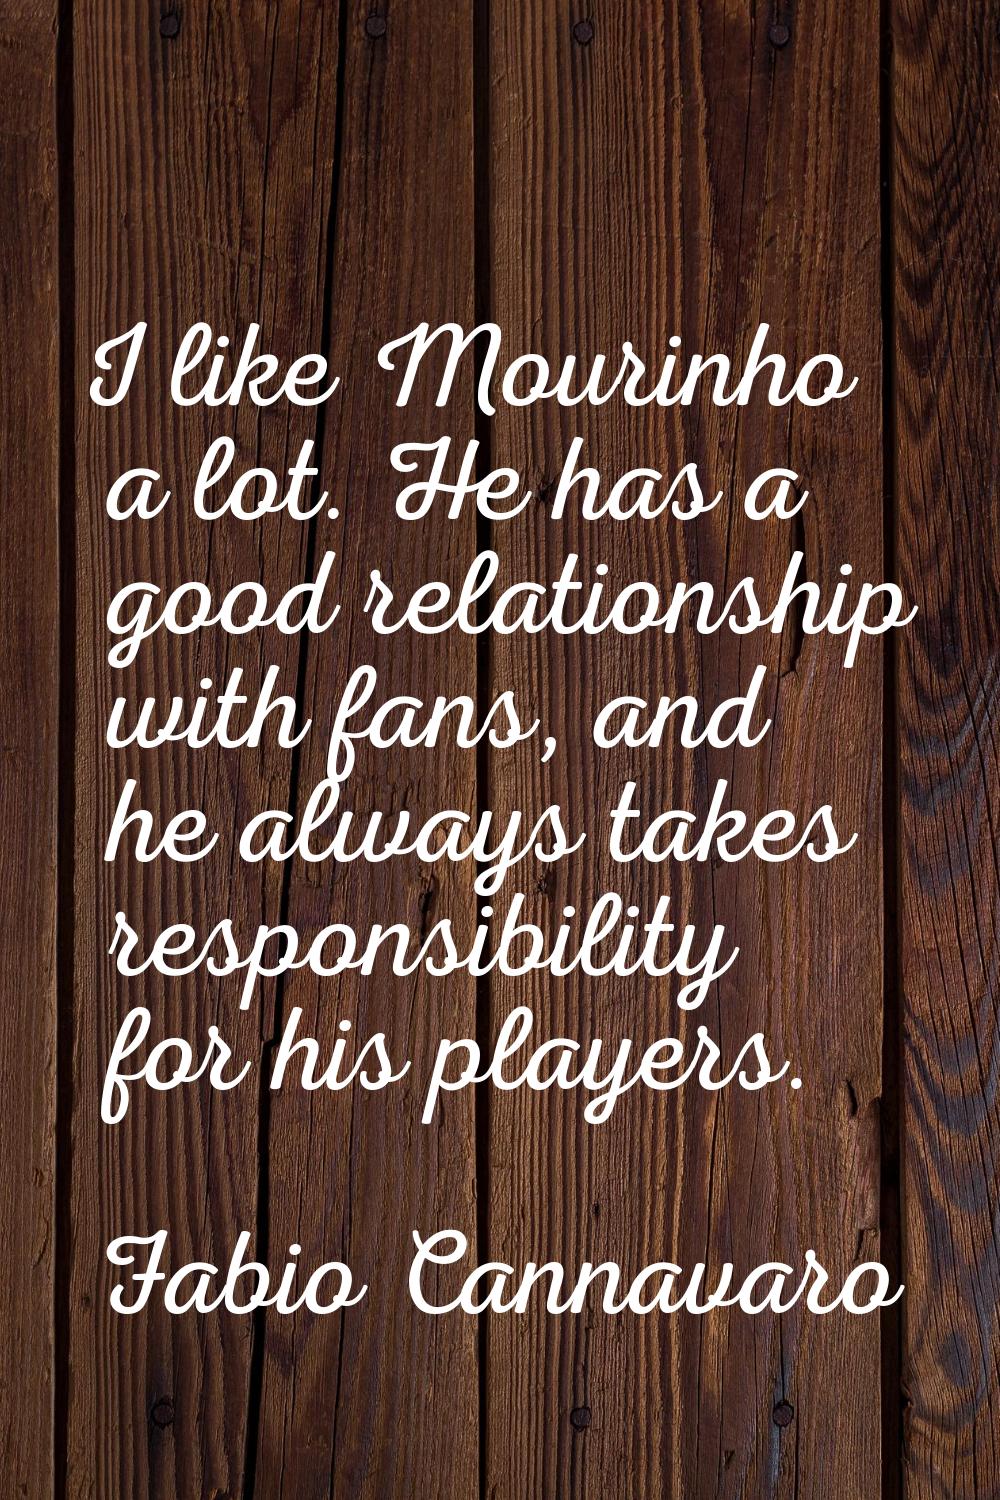 I like Mourinho a lot. He has a good relationship with fans, and he always takes responsibility for